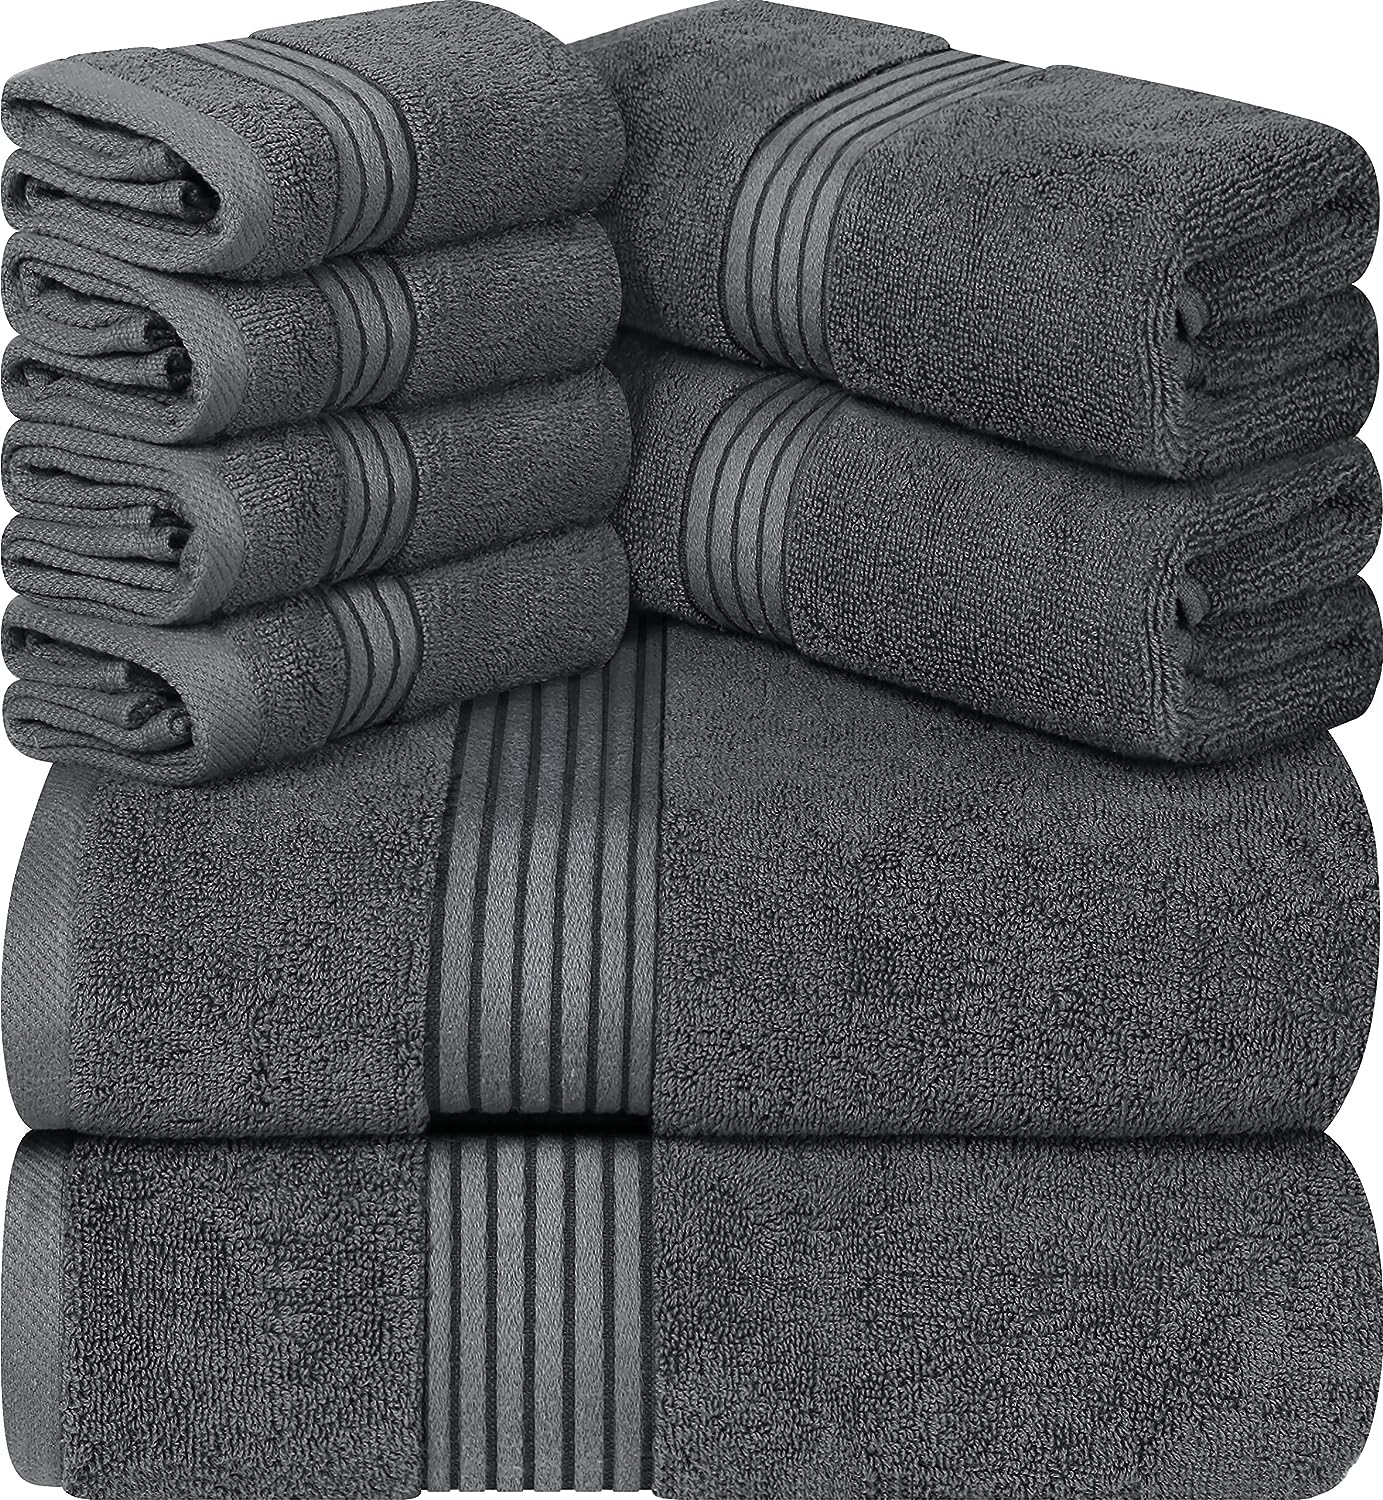 8-Piece Premium Towel Set, 2 Bath Towels, 2 Hand Towels, and 4 Wash Cloths,  600 GSM 100% Ring Spun Cotton Highly Absorbent Towels for Bathroom, Gym,  Hotel, and Spa (Neon Green) 